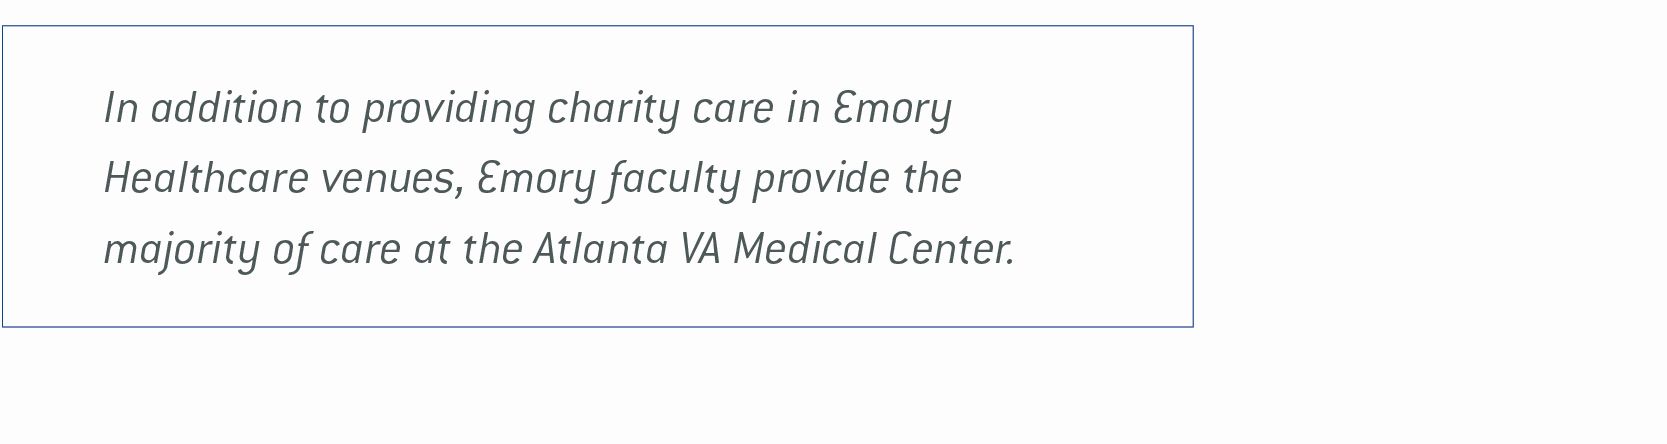 image of text box that reads In addition to providing charity care in Emory Healthcare venues, Emory faculty provide the majority of care at the Atlanta VA Medical Center.